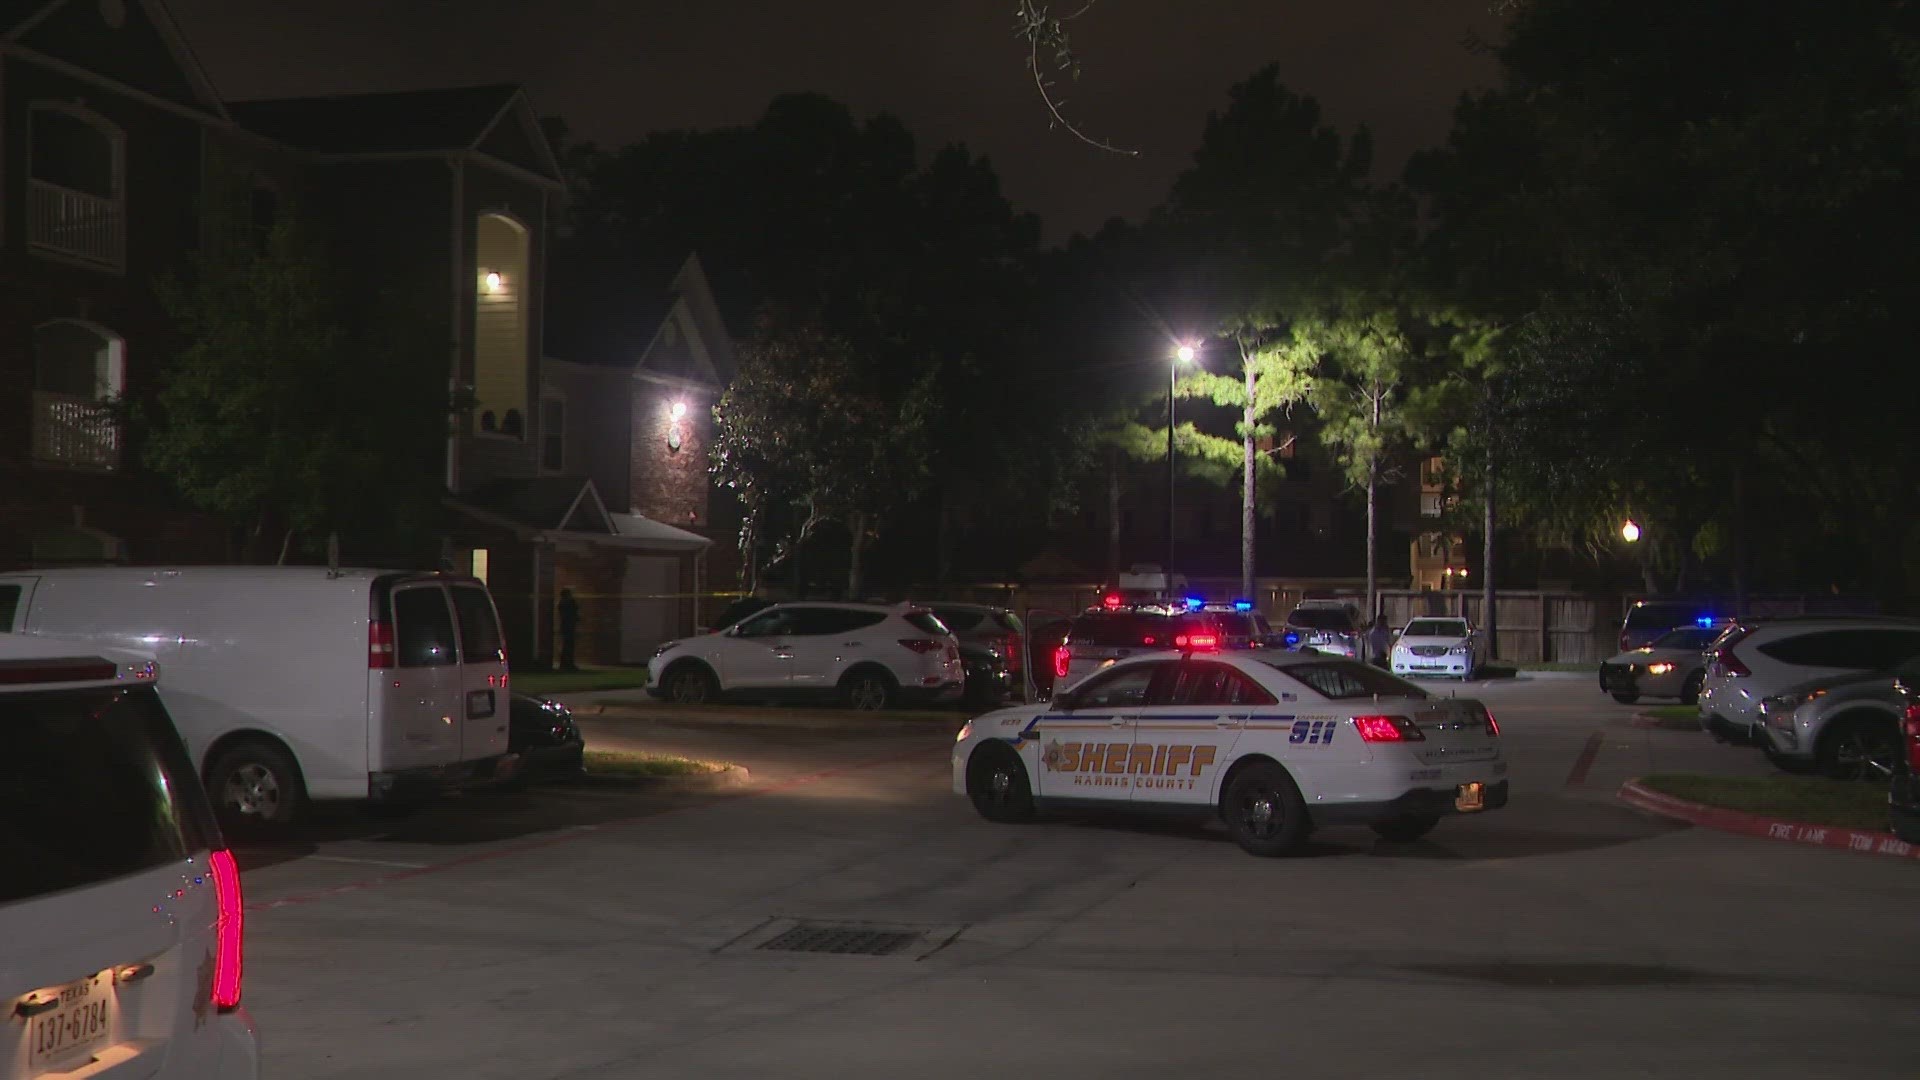 A 13-year-old boy was found dead at a northwest Harris County apartment complex early Monday, according to Sheriff Ed Gonzalez.